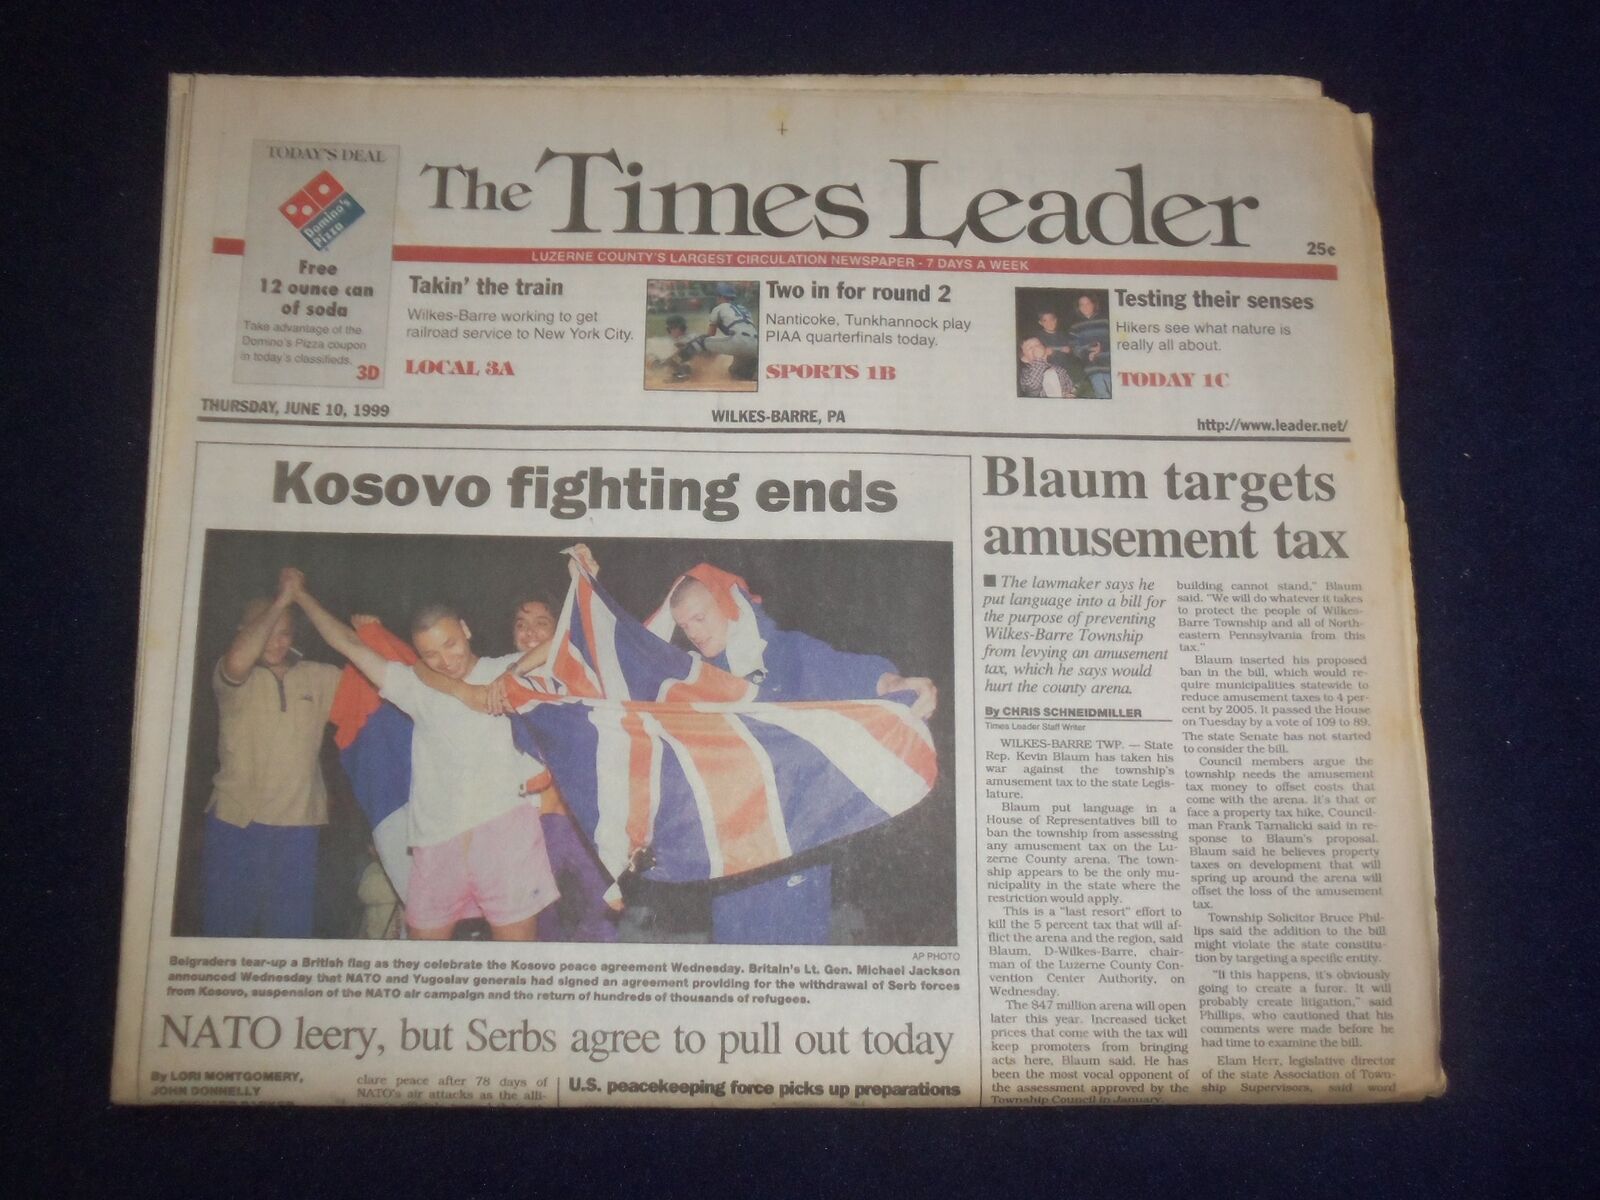 1999 JUNE 10 WILKES-BARRE TIMES LEADER - KOSOVO FIGHTING ENDS - NP 8259